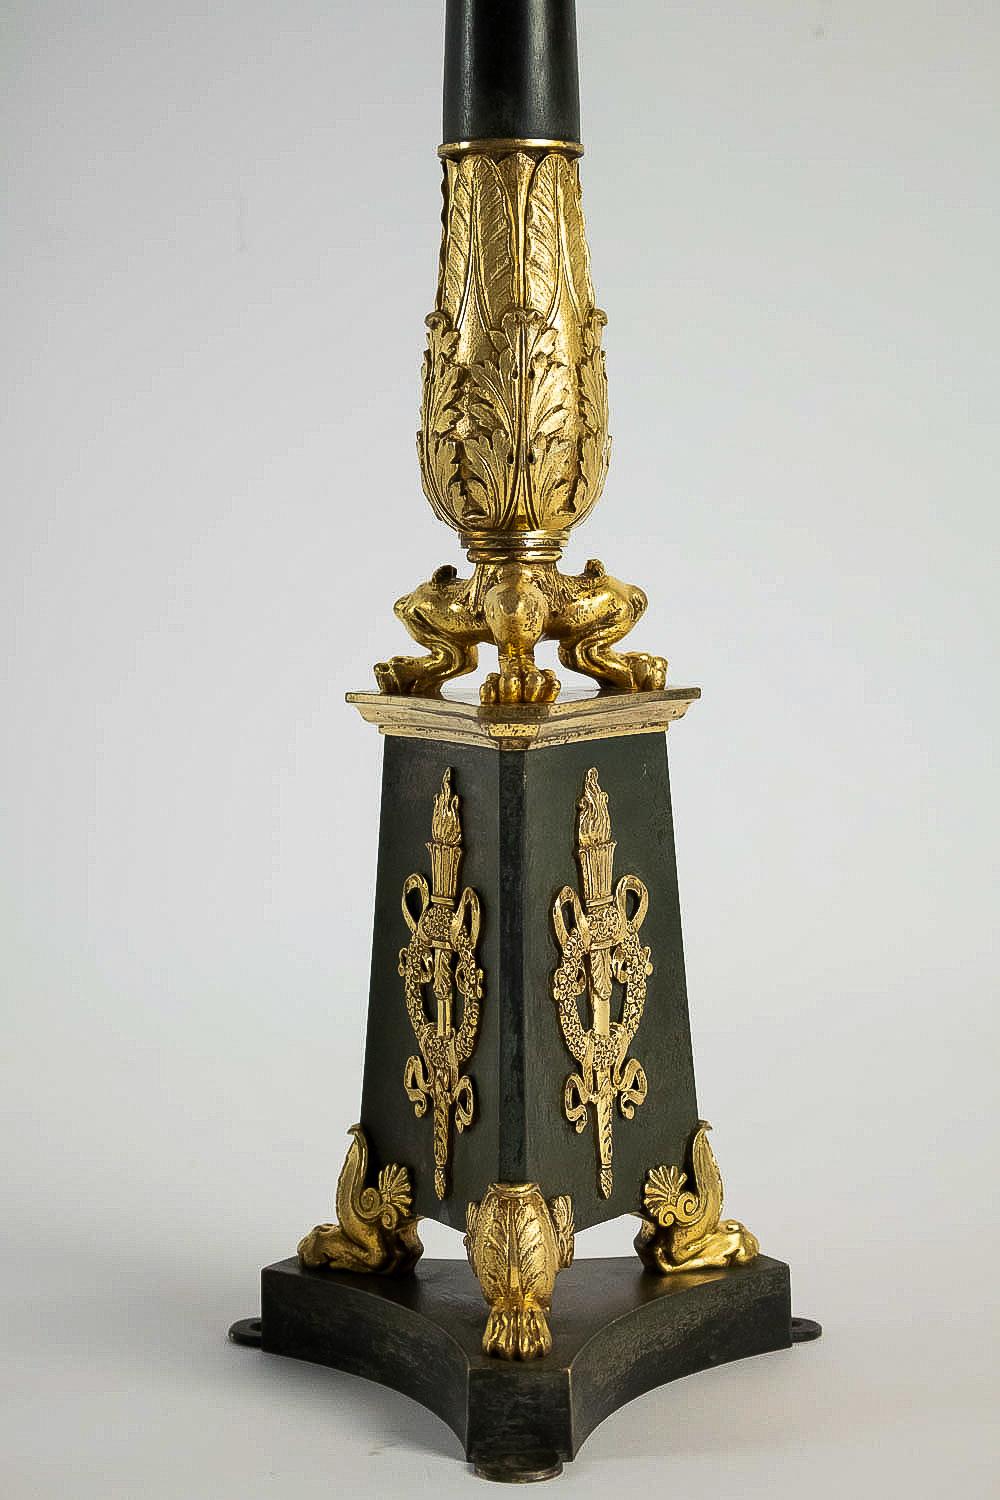 Large Pair of French Empire or Restauration Period Candelabra, circa 1815-1830 For Sale 3